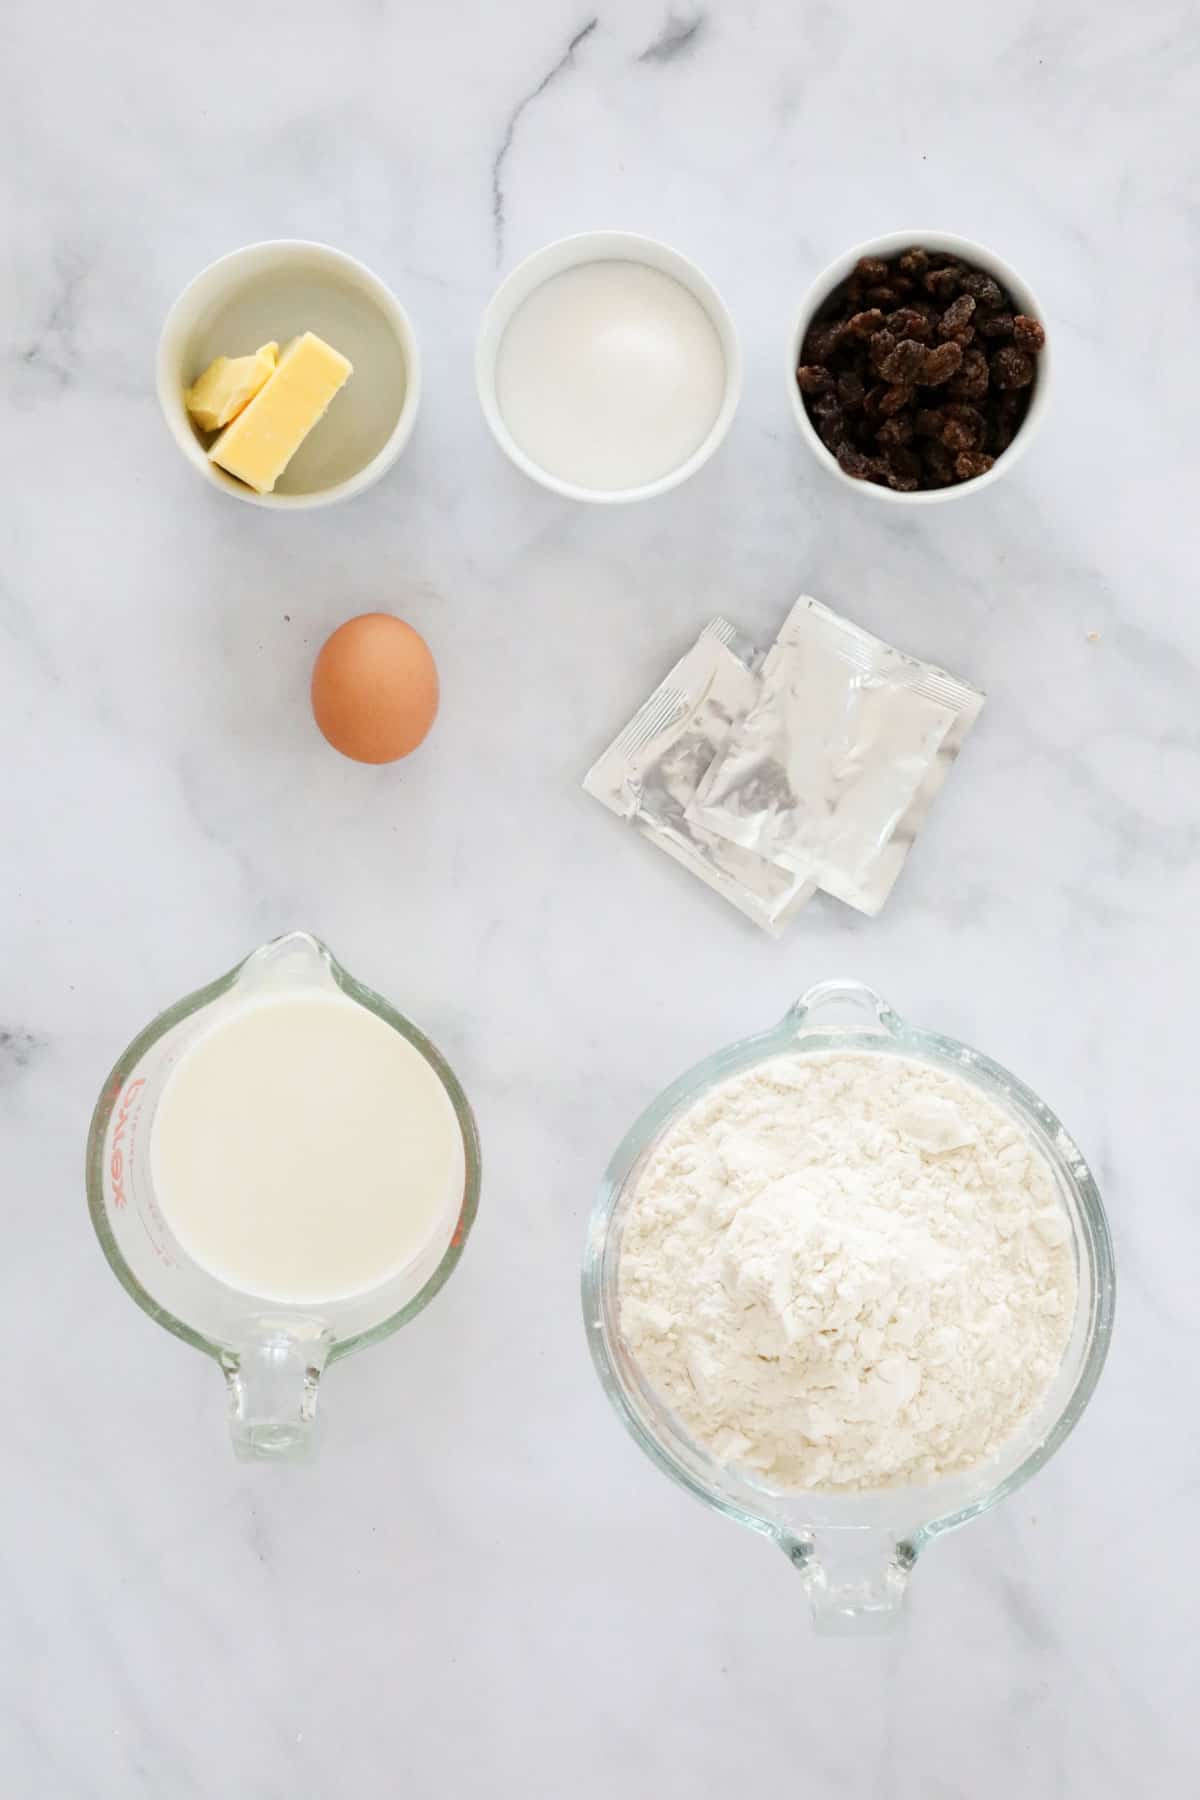 ingredients needed to make finger buns weighed out and placed in individual bowls.